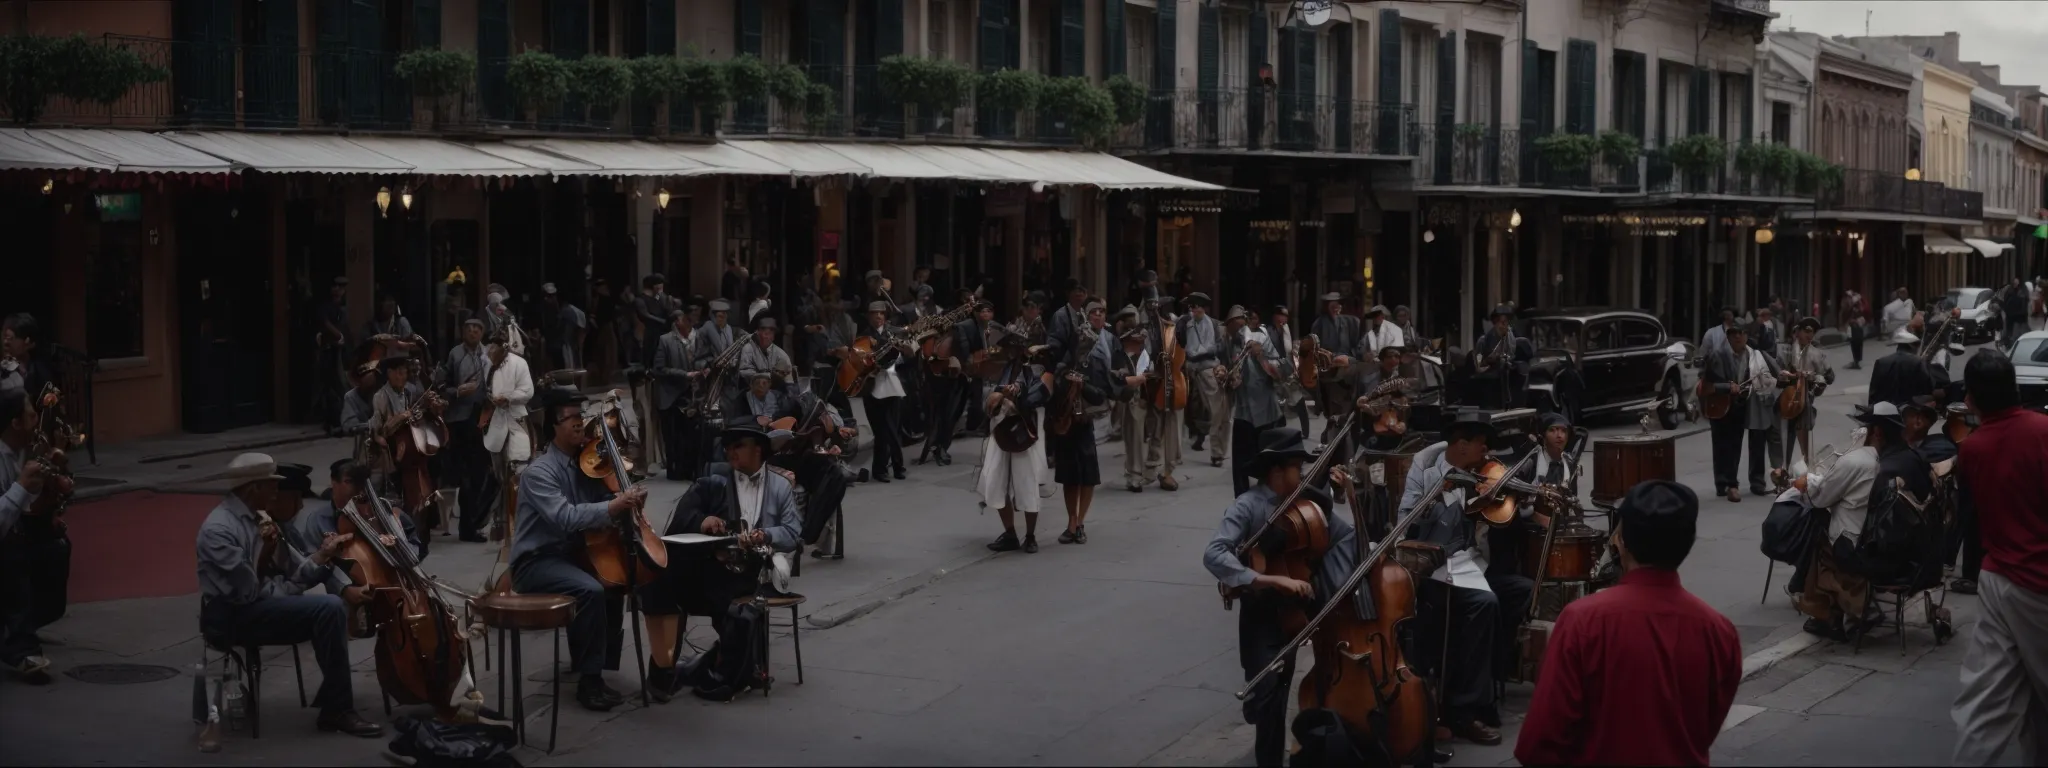 a bustling french quarter street scene with musicians, iconic architecture, and engaged passersby.